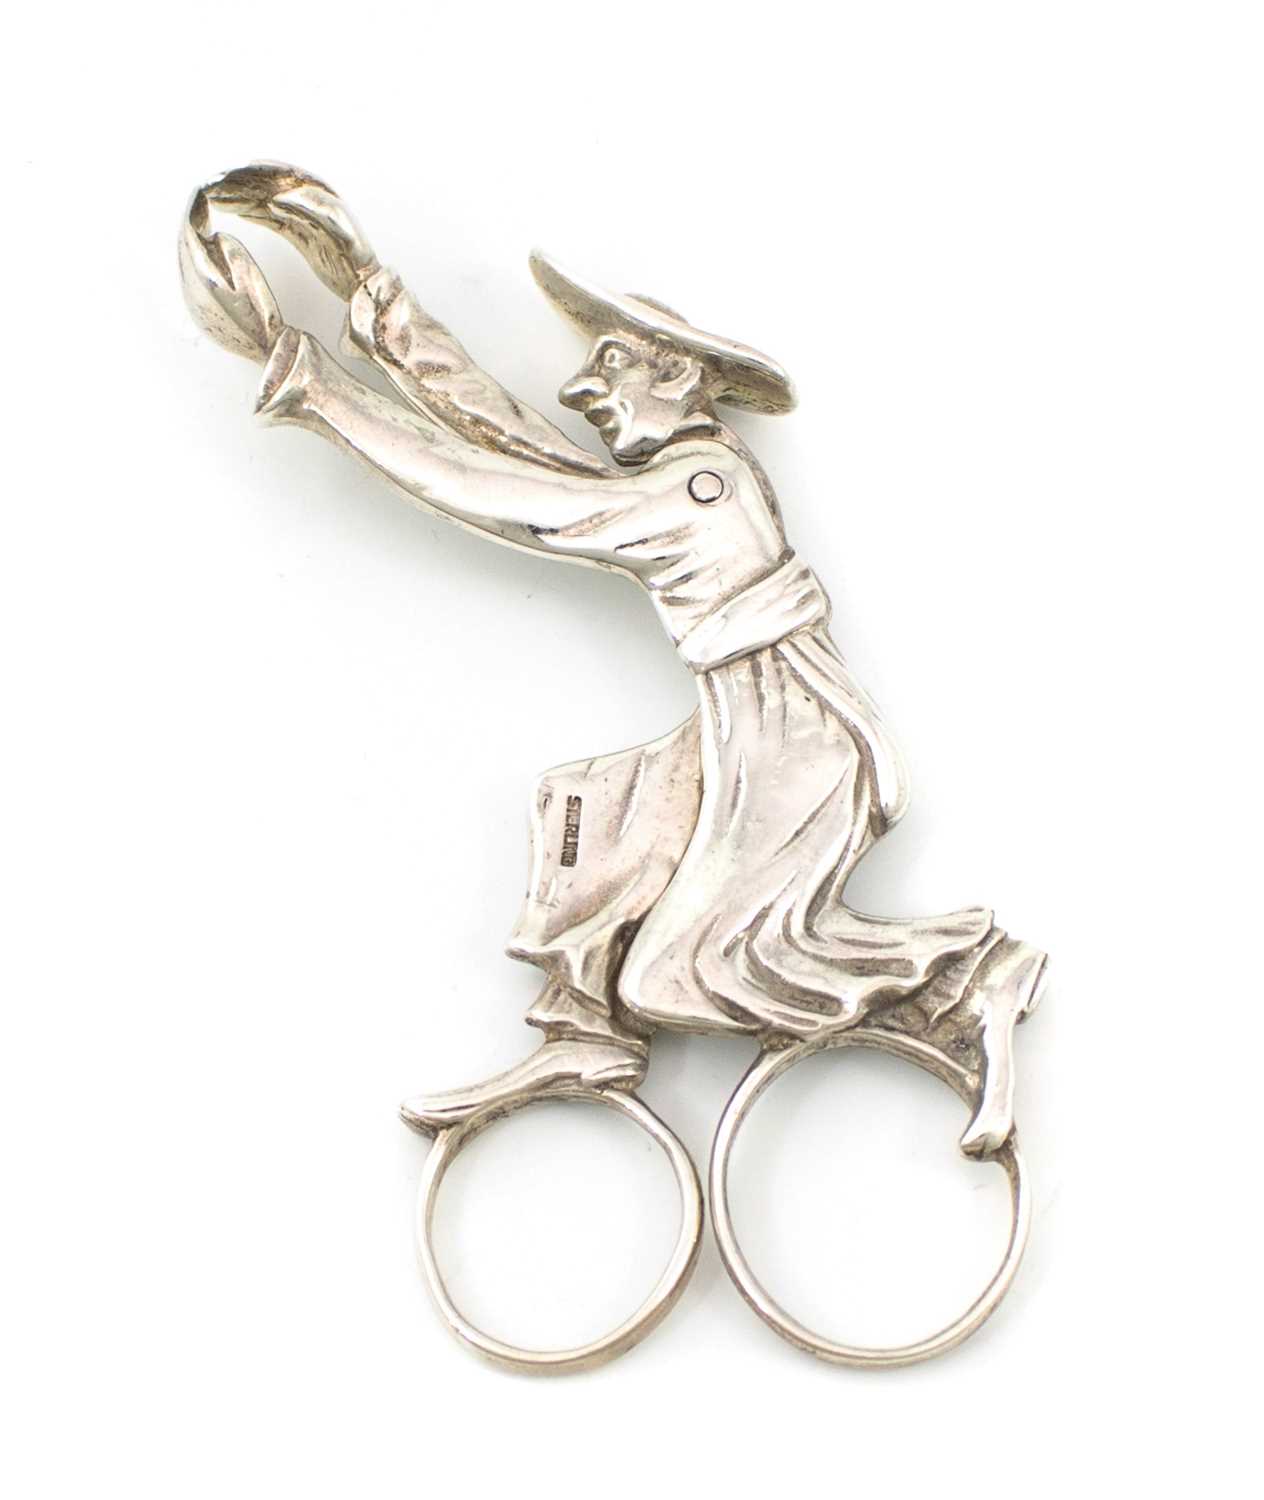 A pair of novelty silver tongs, marked Sterling, modelled as a running priest with out-stretched